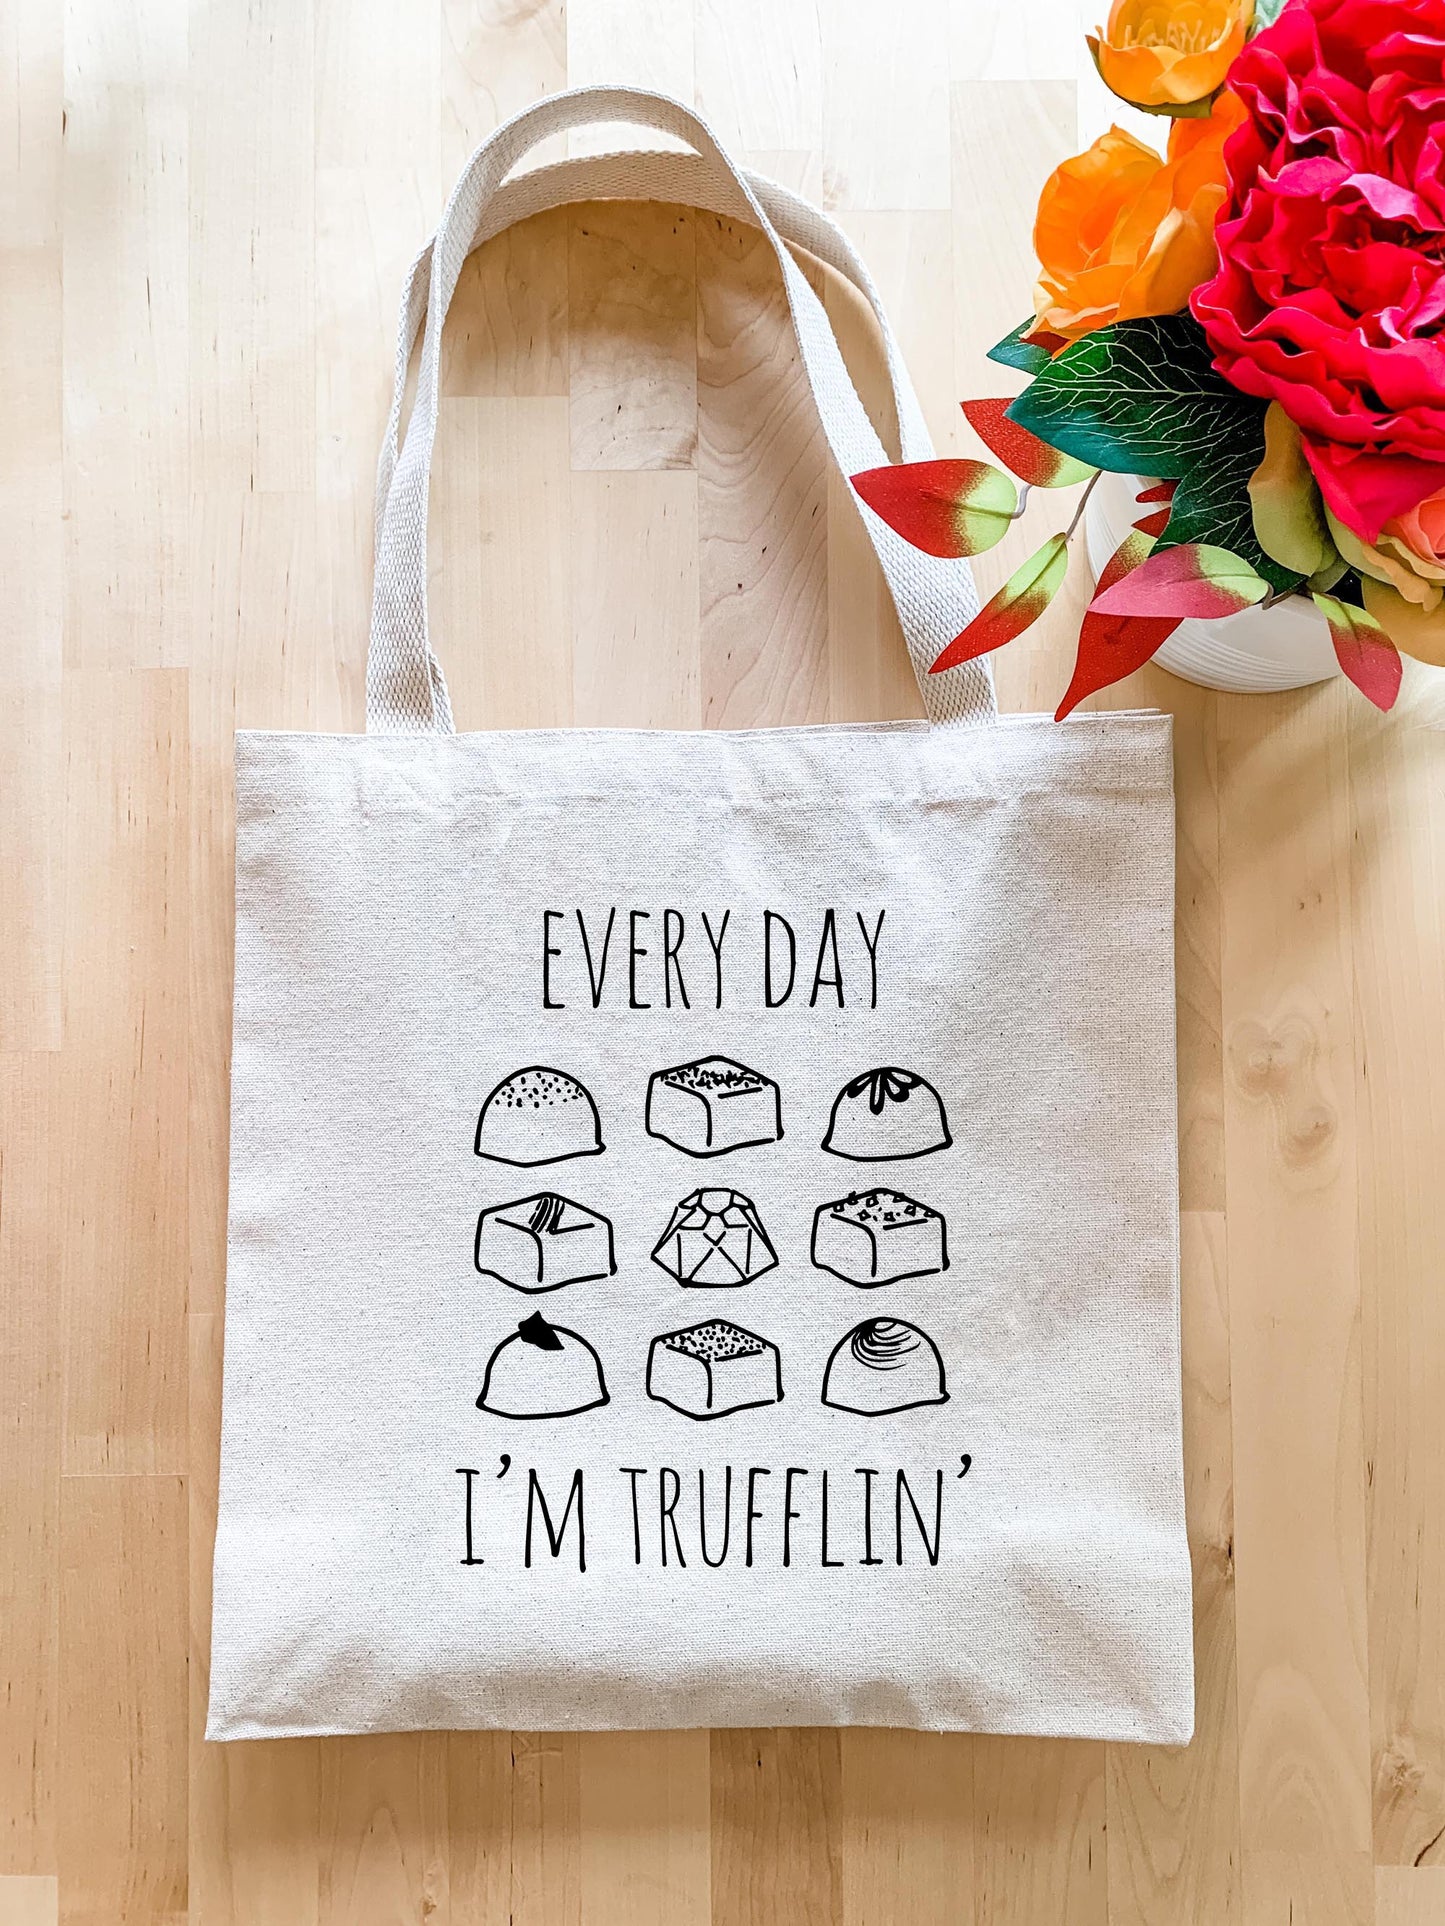 Every Day I'm Trufflin' - Tote Bag - MoonlightMakers